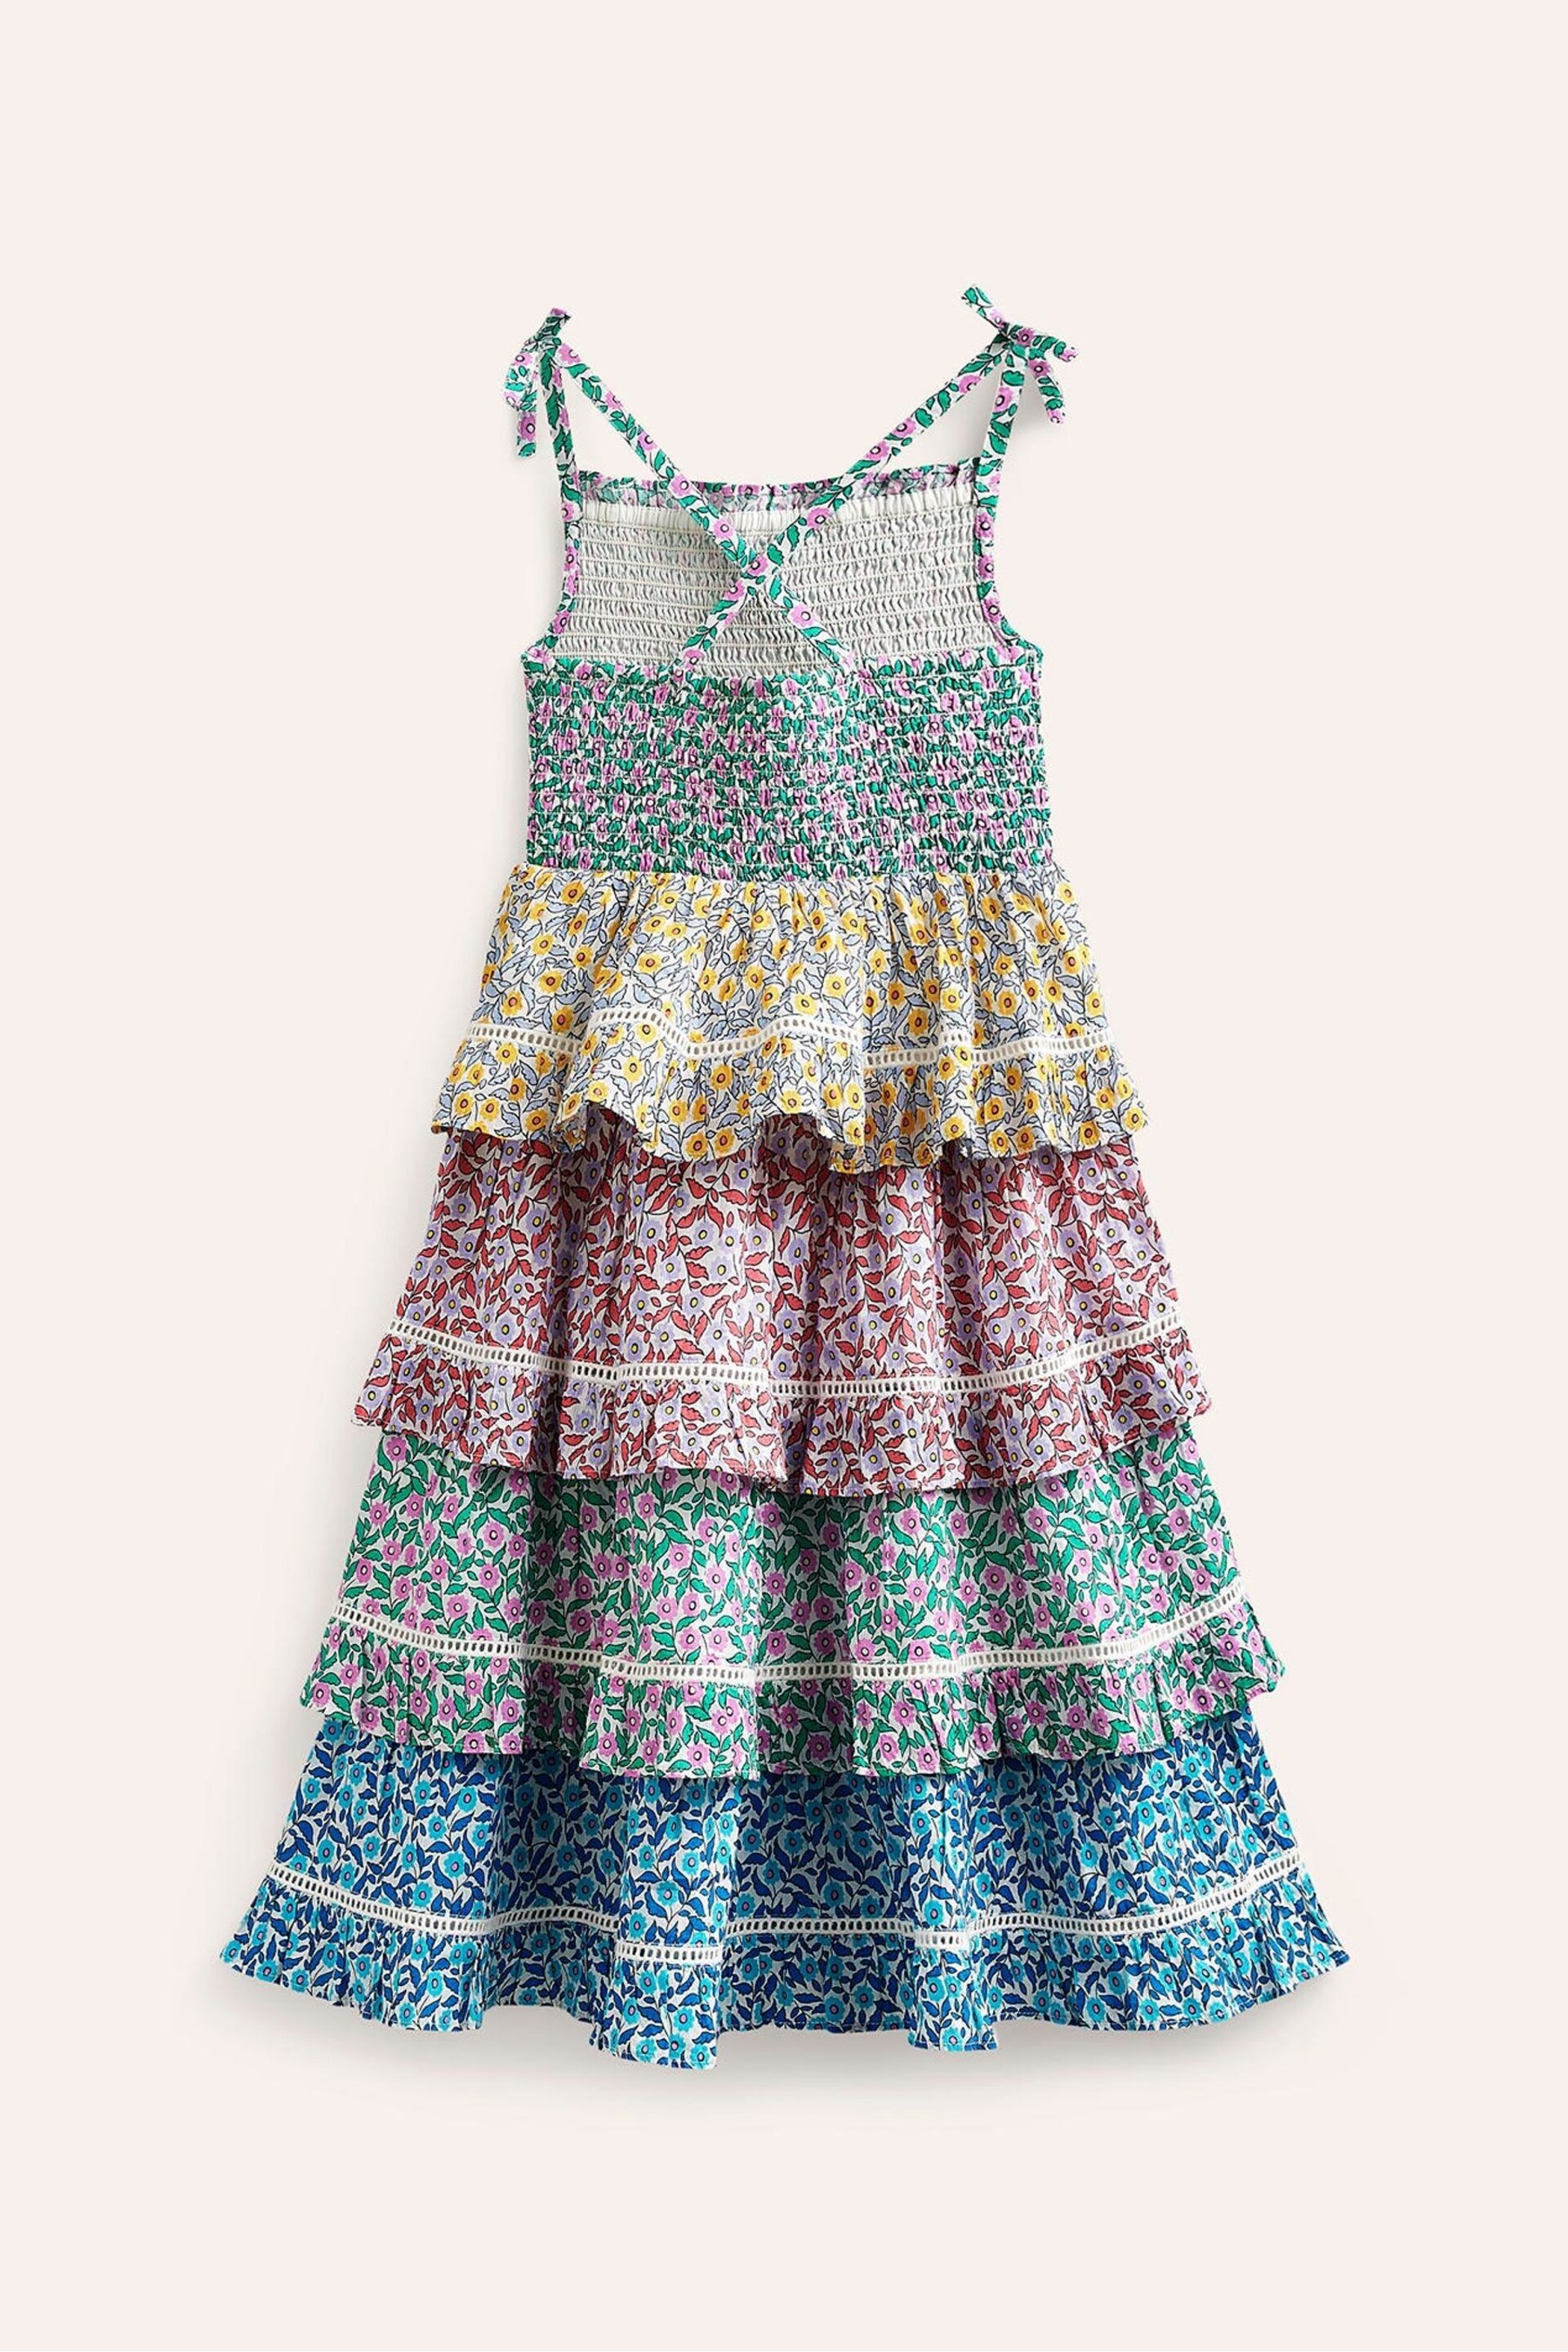 Boden Green Tiered Hotchpotch Sundress - Image 2 of 3